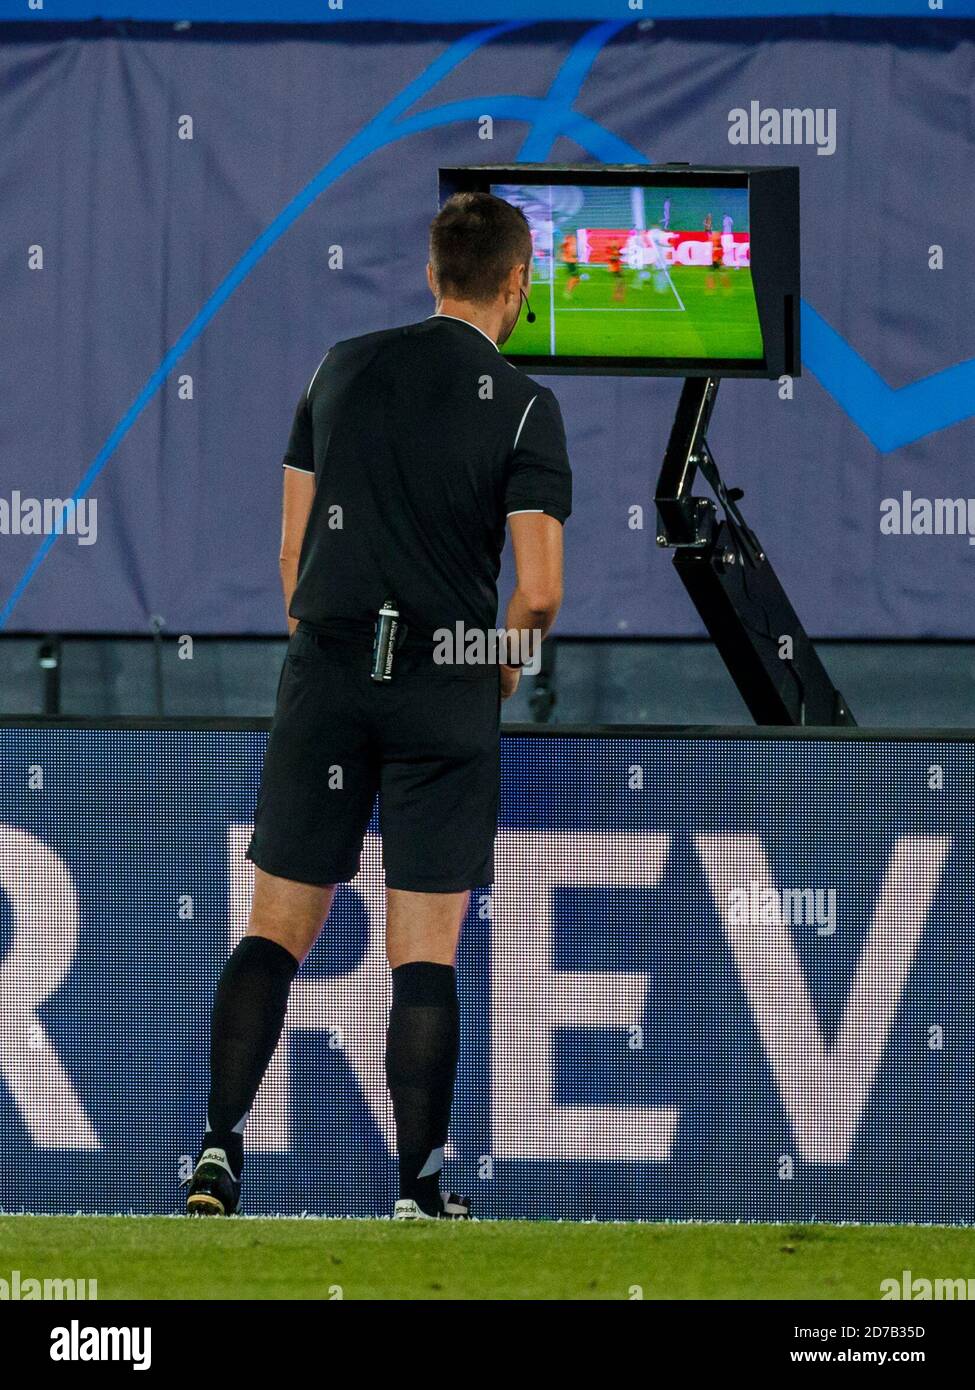 Madrid, Spain. 21st Oct, 2020. Referee watches the VAR during the UEFA Champions League match between Real Madrid and FC Shakhtar Donetsk at at Estadio Alfredo Di Stefano on October 21, 2020 in Madrid, Spain. Credit: Dax Images/Alamy Live News Stock Photo